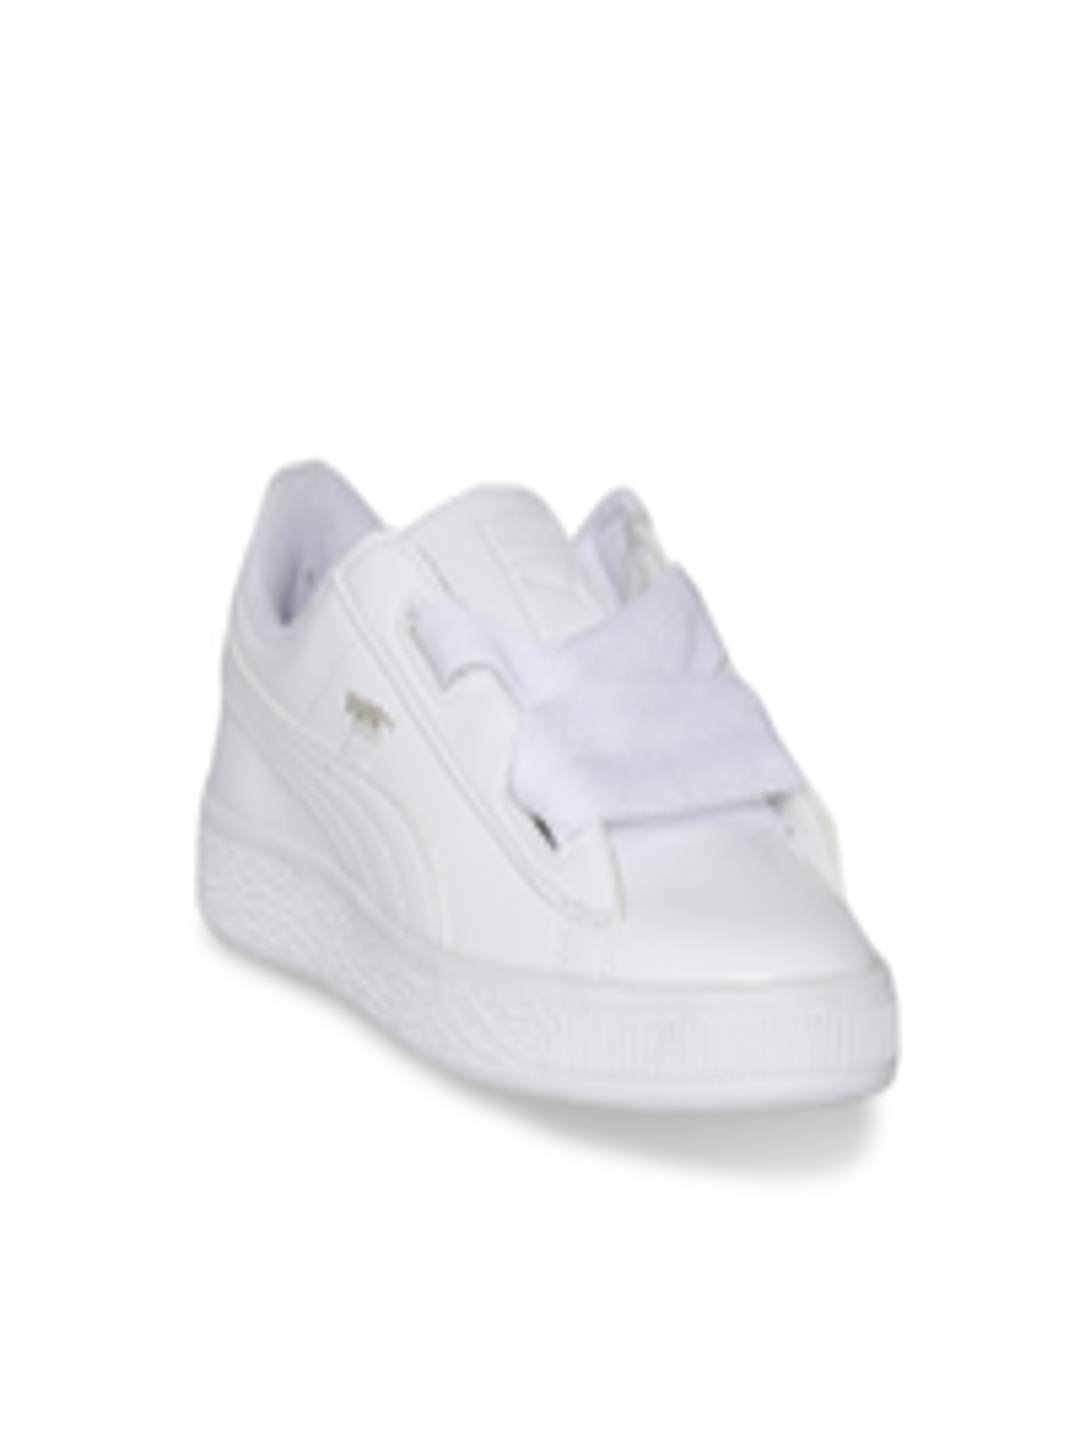 Buy Puma Girls White Leather Sneakers - Casual Shoes for Girls 2335379 ...